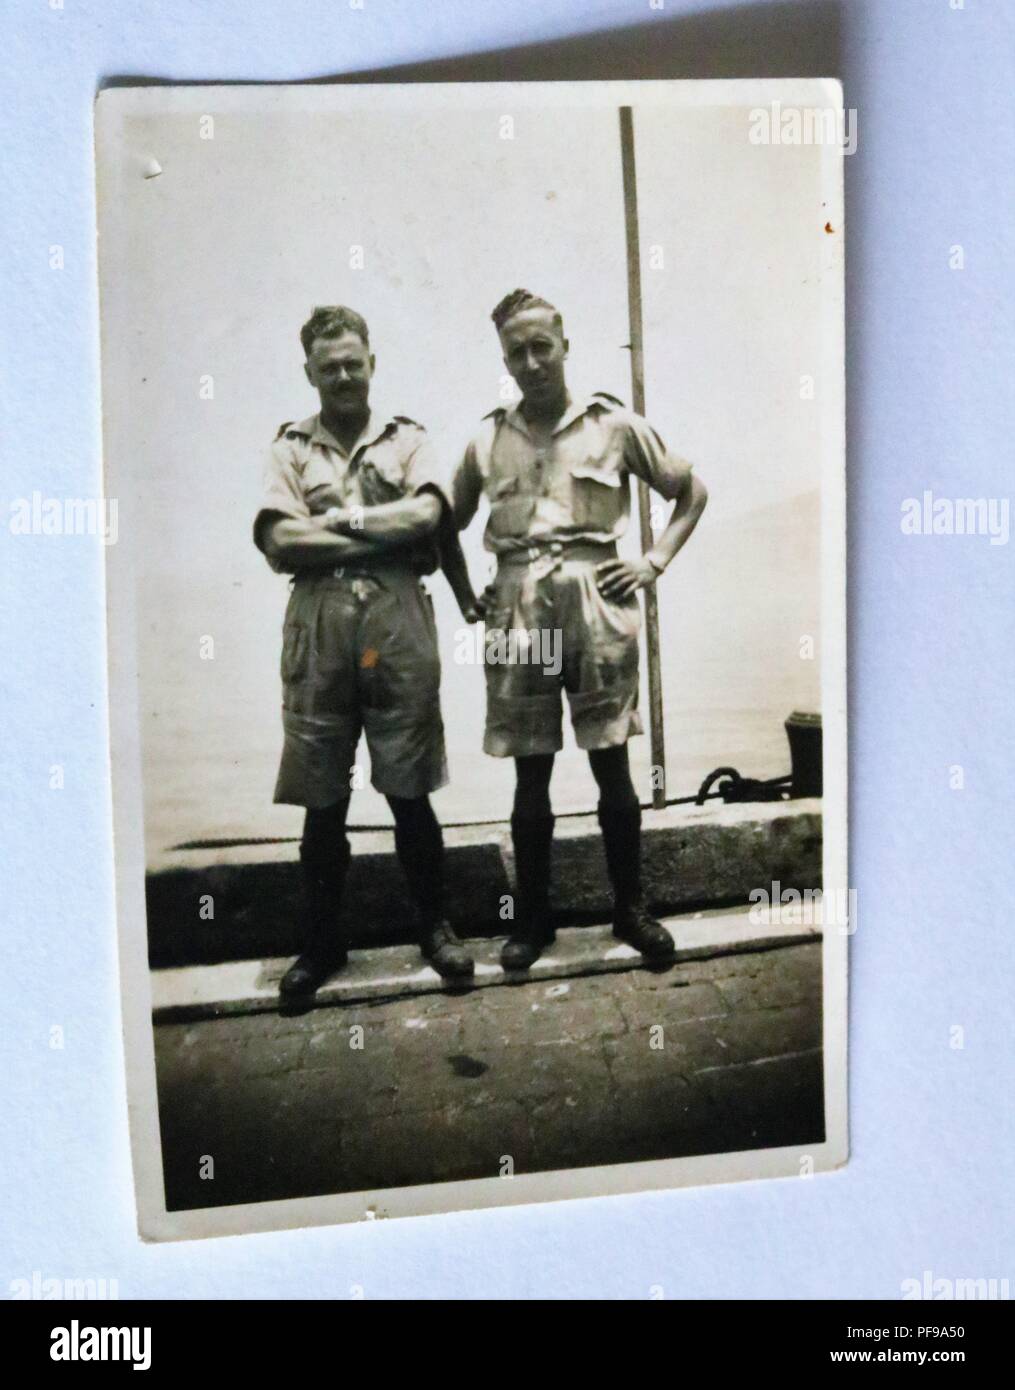 Social History - Black and white old photograph showing two men wearing shorts 1930s / 1940s Stock Photo